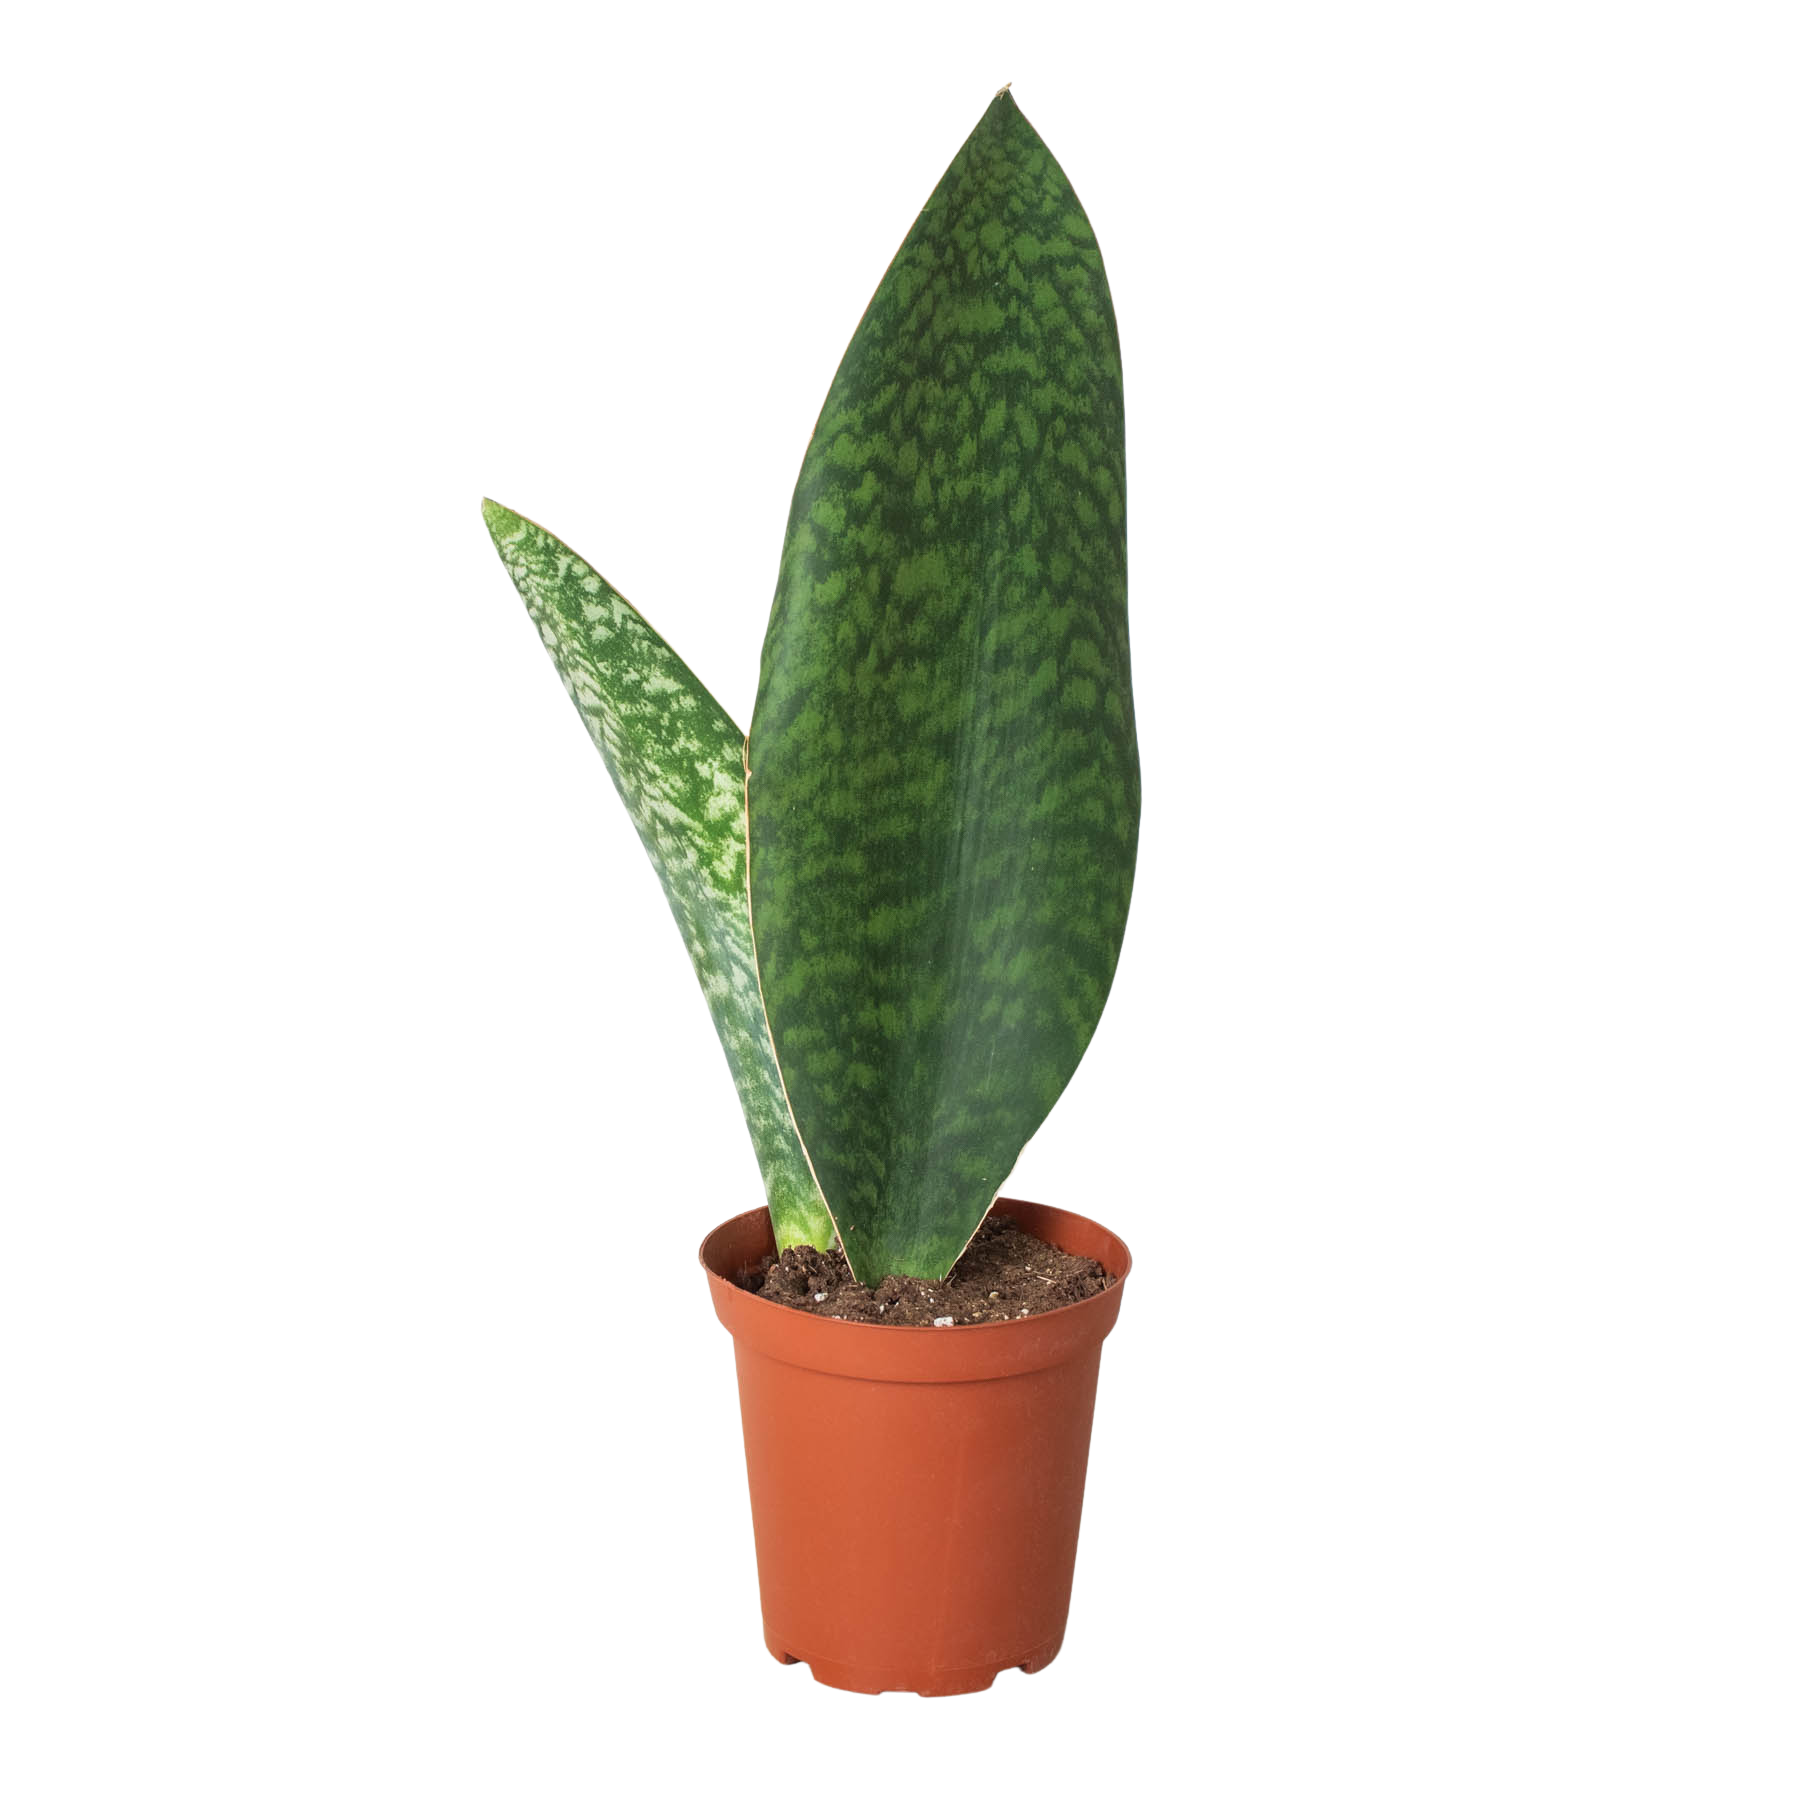 Shark Fin Snake Plant Questions & Answers